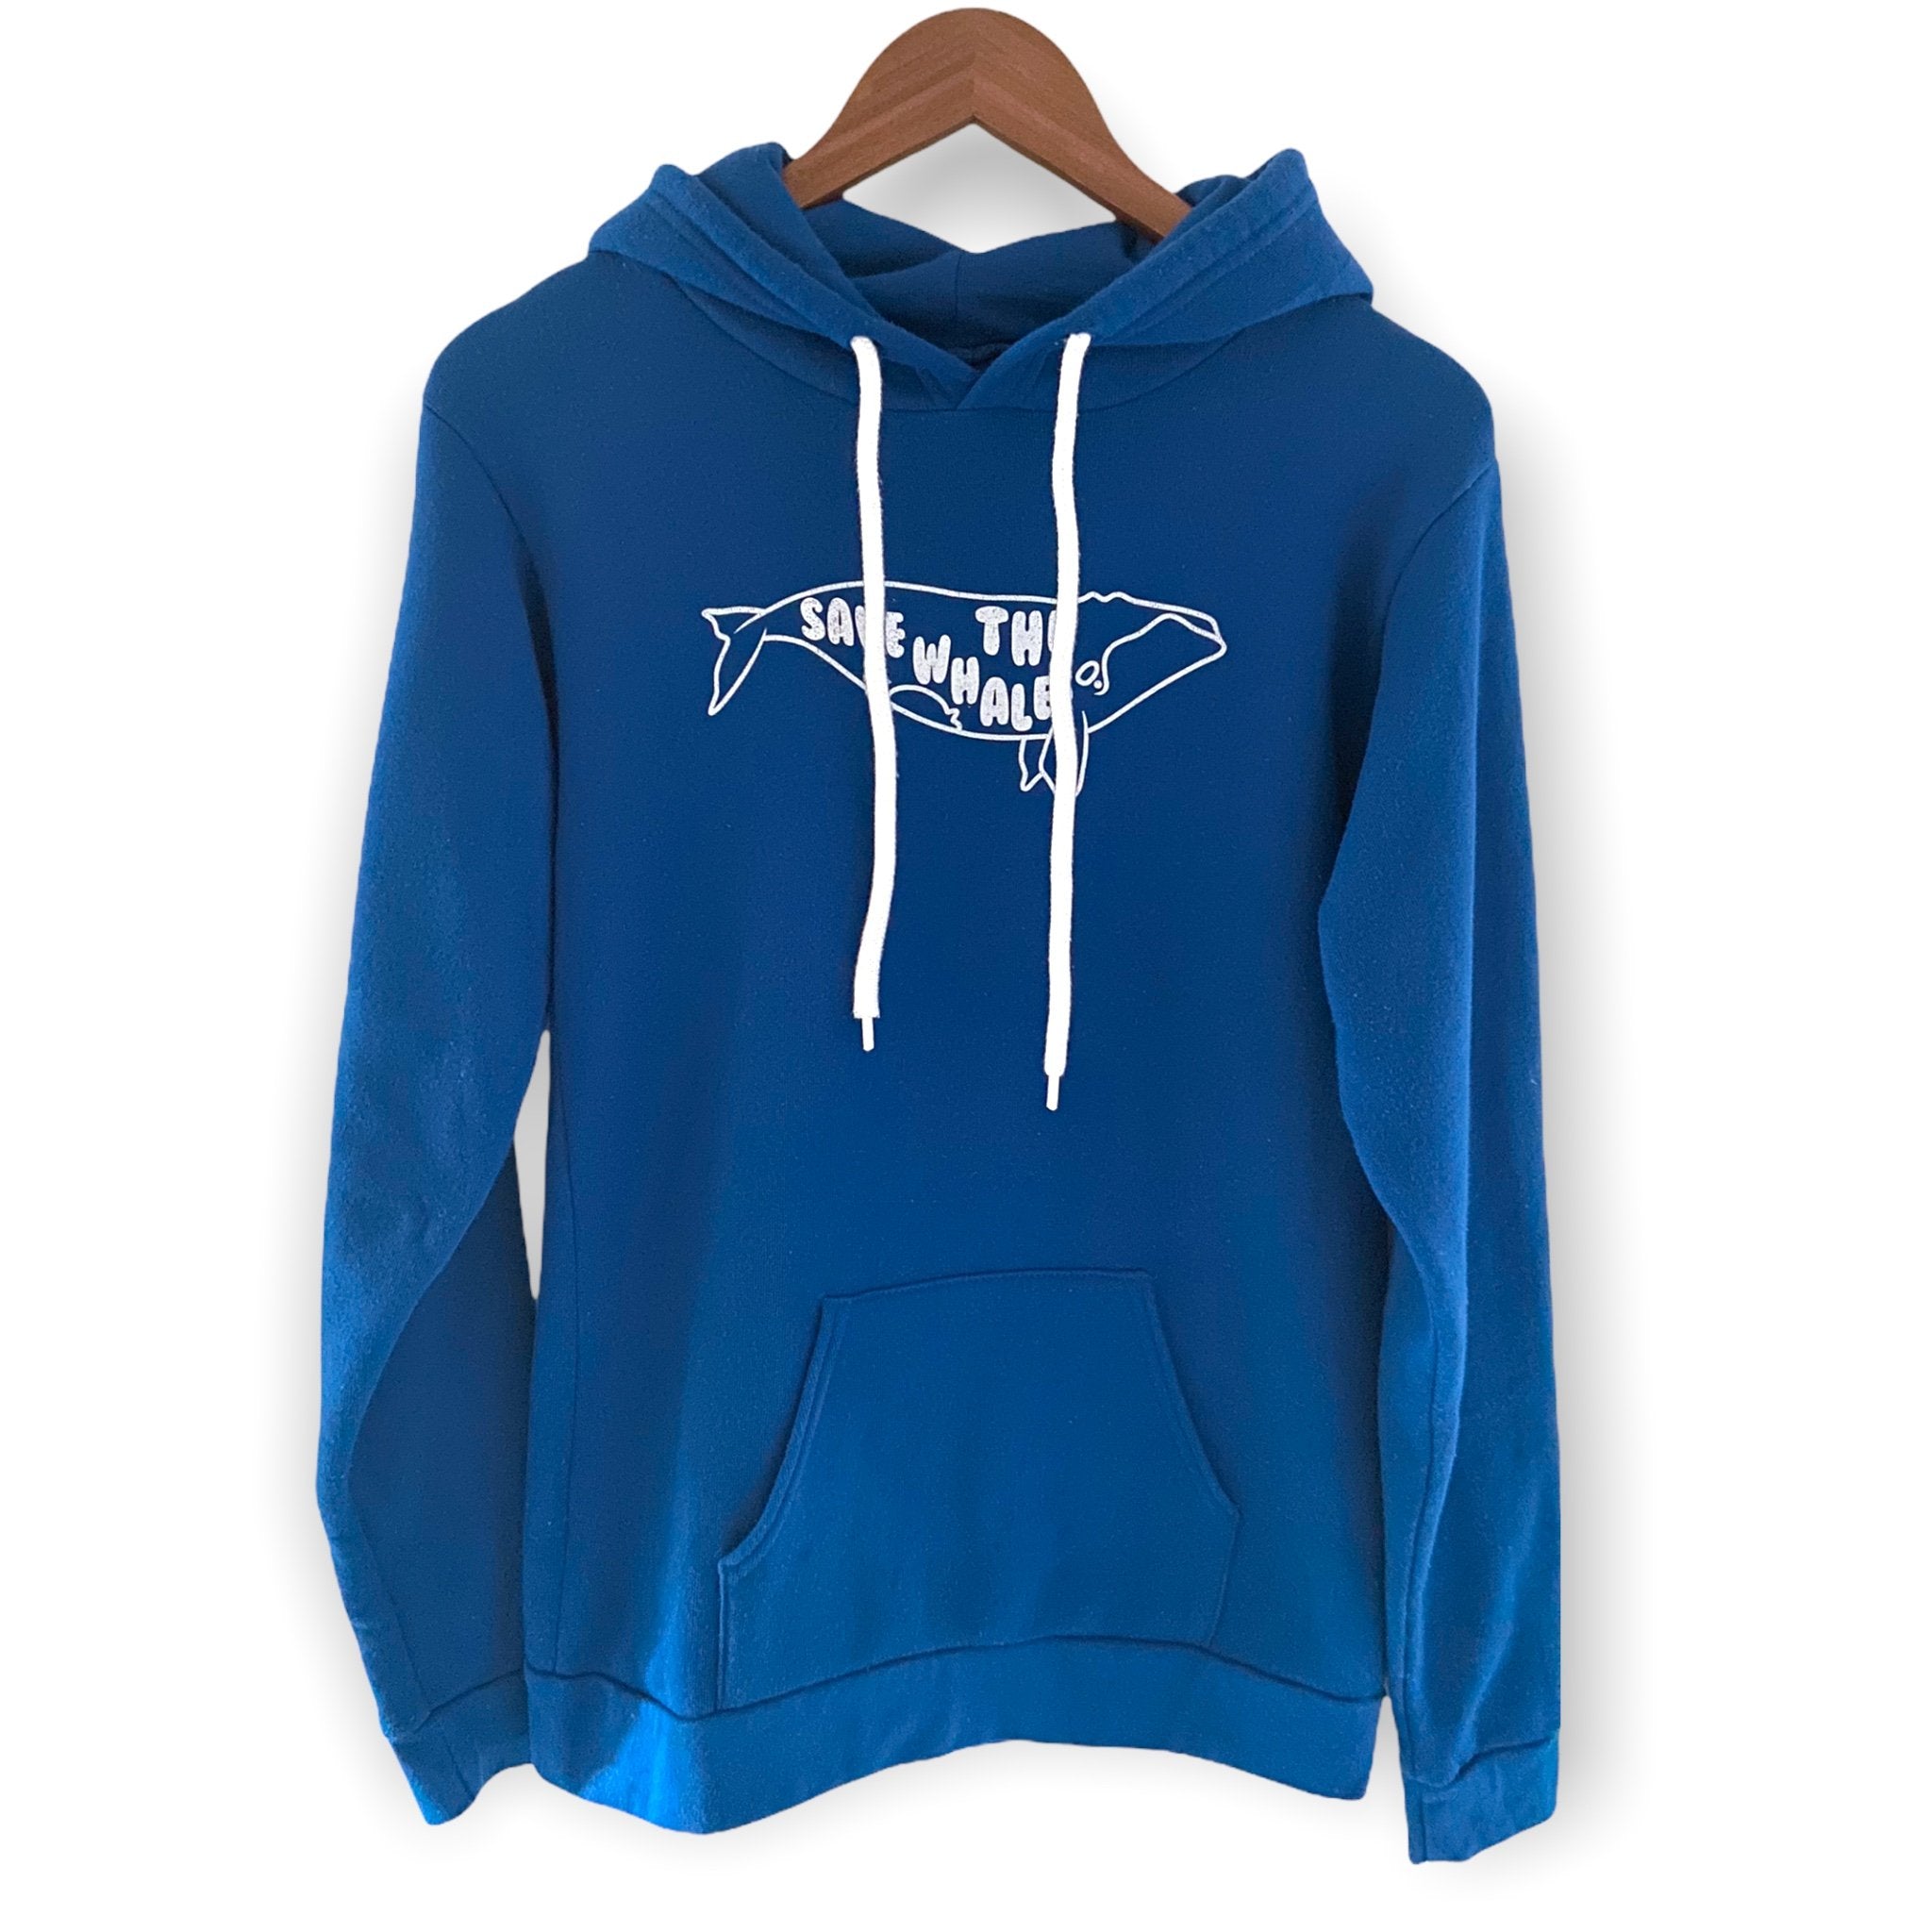 Save the Whales Blue Unisex Hoodie - L Only